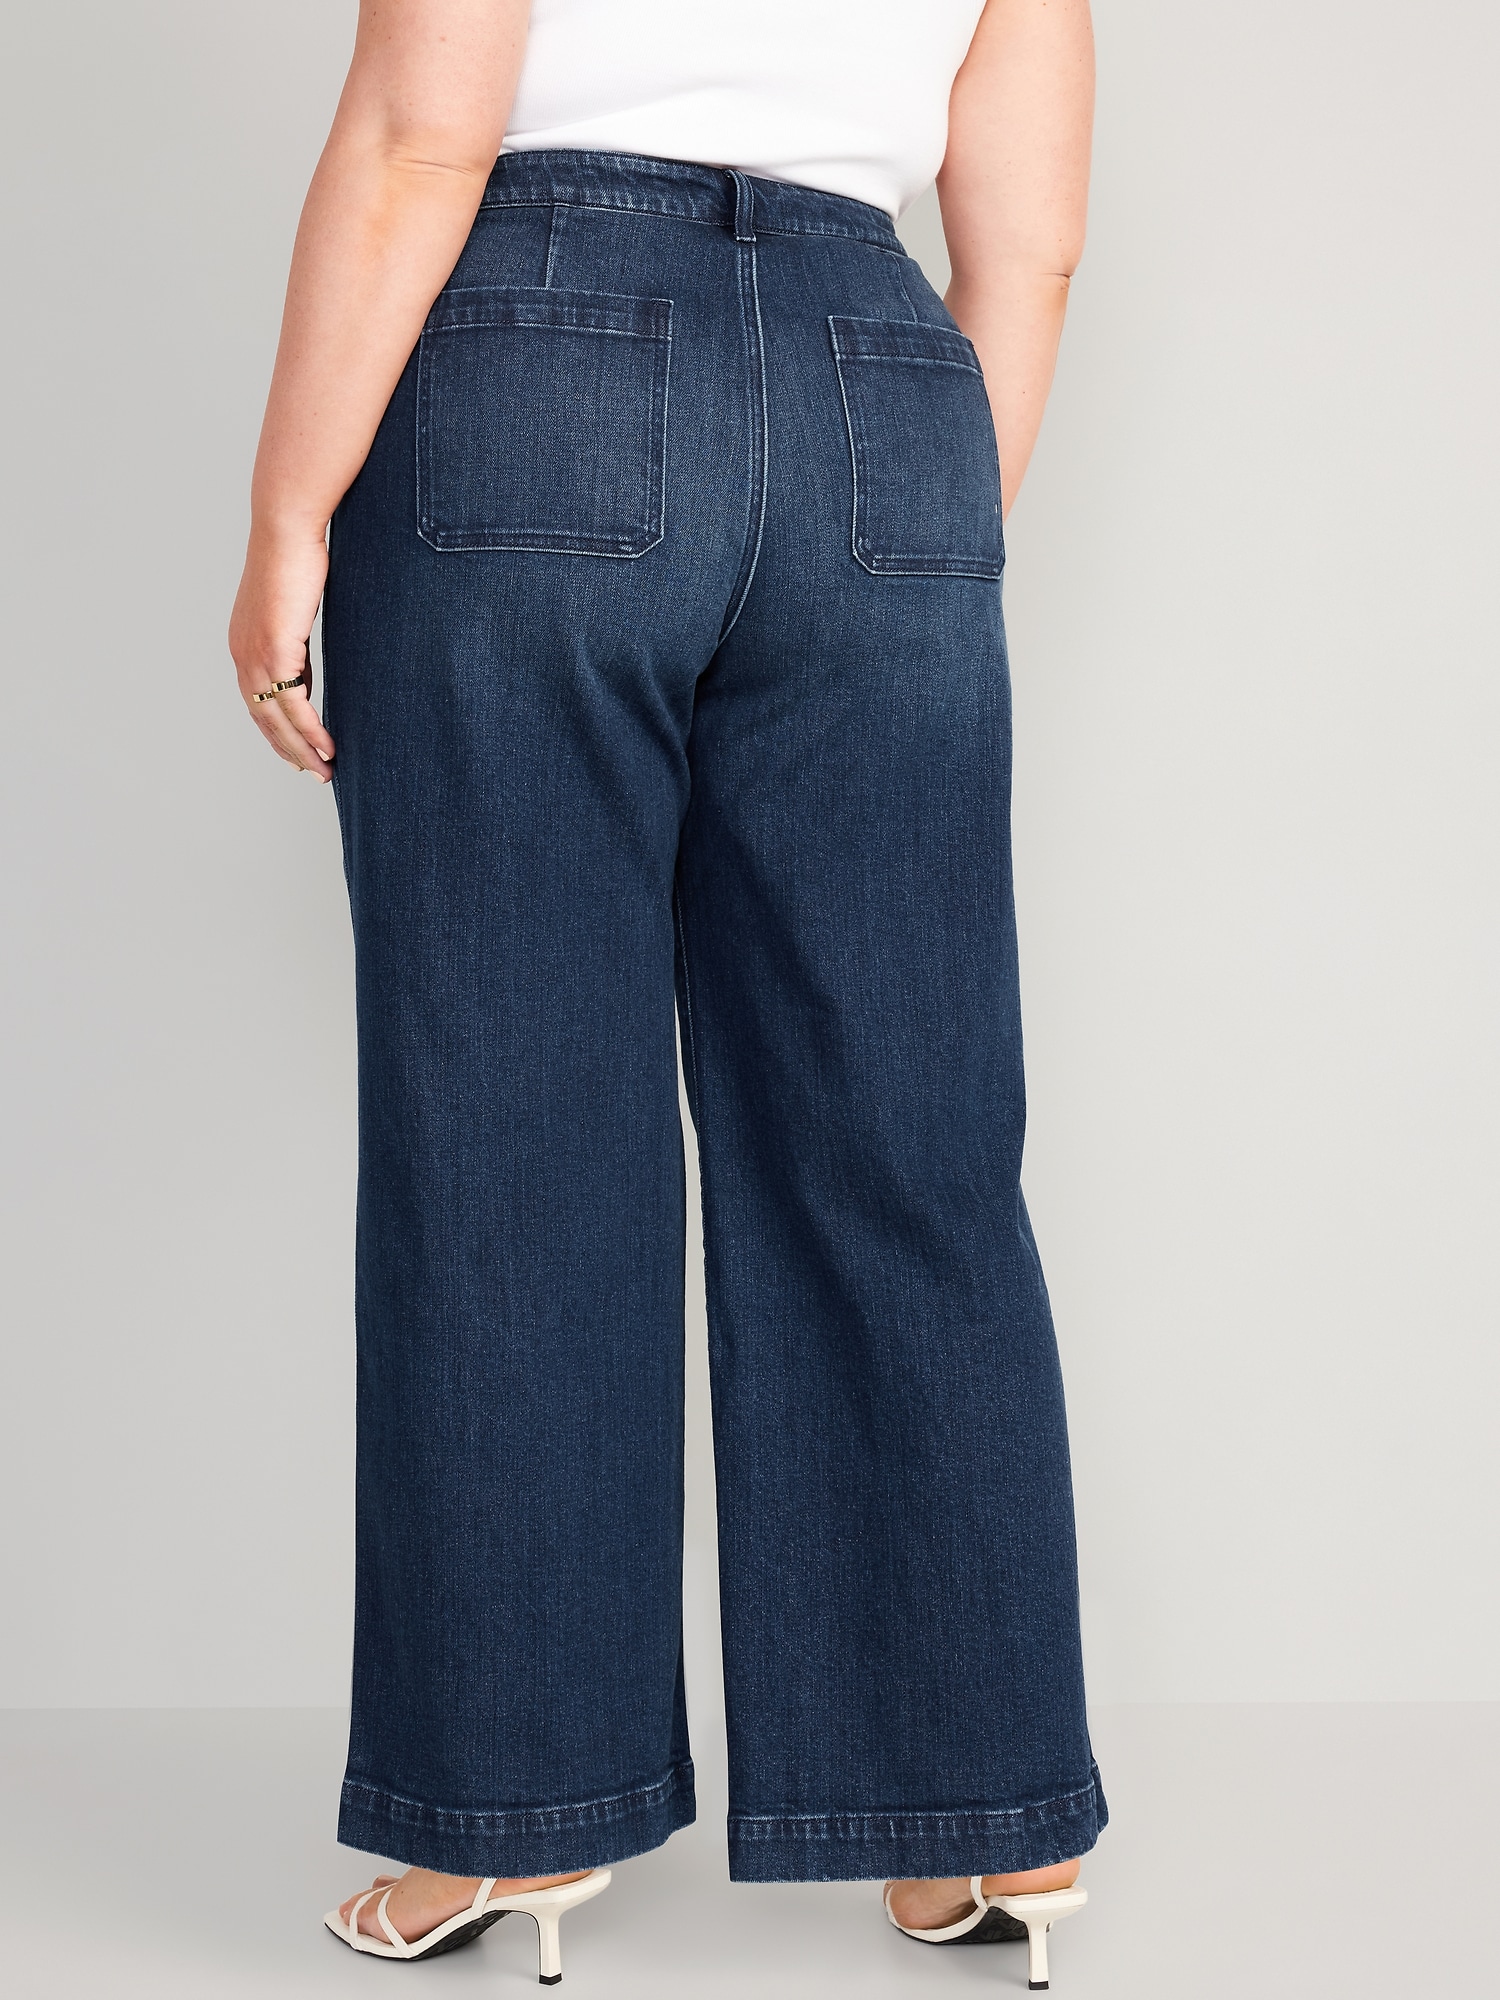 Old Navy Campeche Blue Stretch Denim High Rise Flare Jeans 14 - $31 - From  Meg